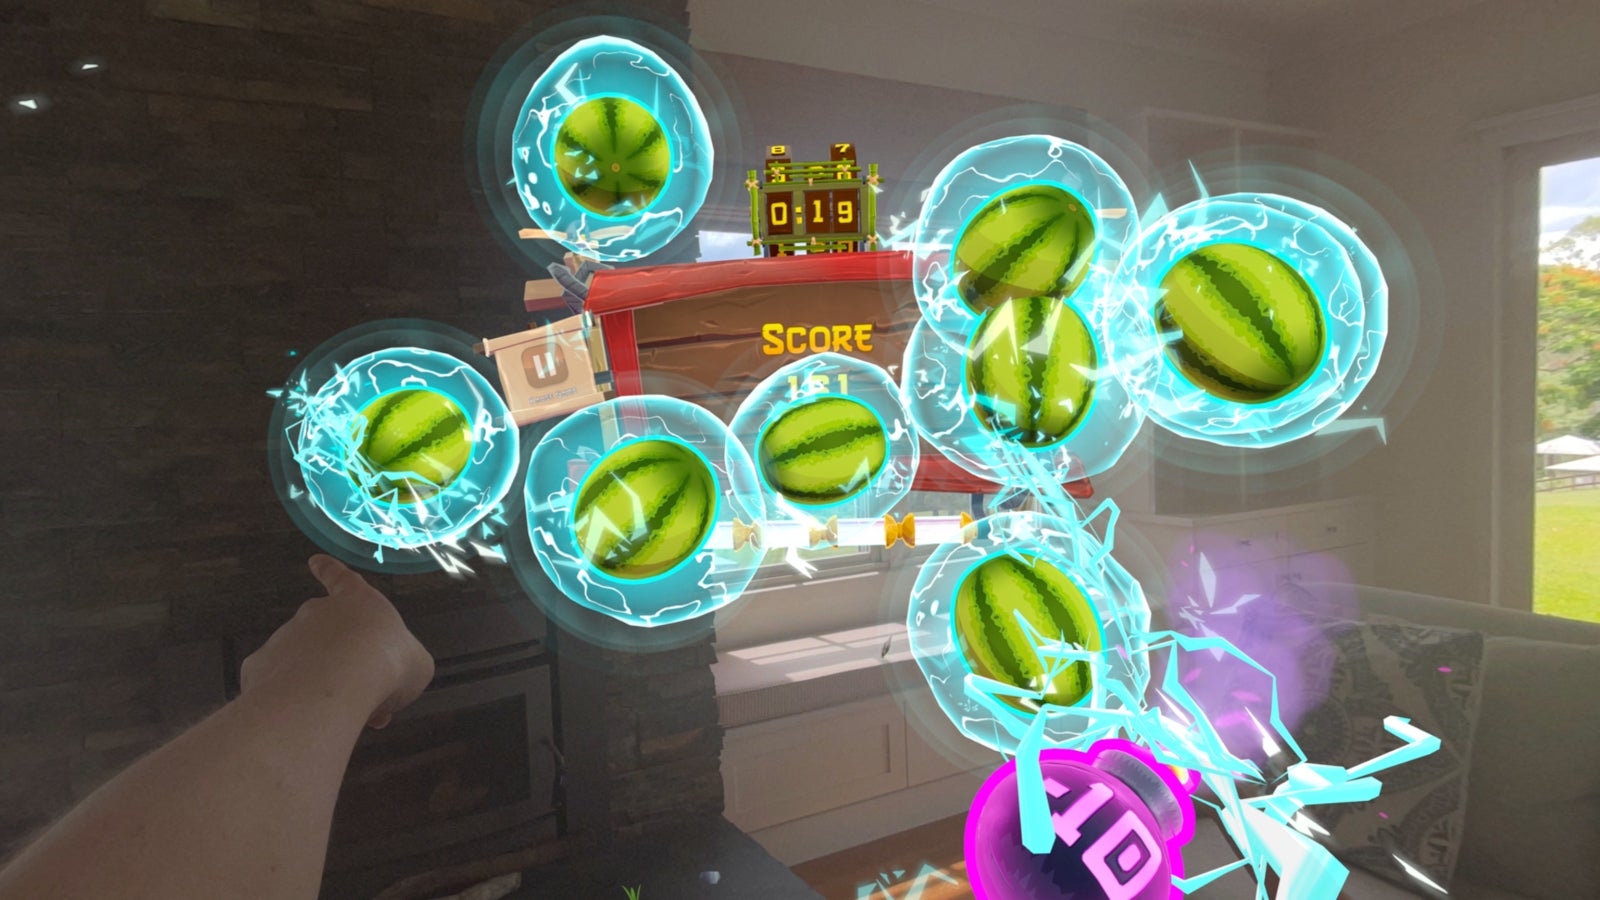 Wildly popular mobile game Super Fruit Ninja is coming to Apple Vision Pro